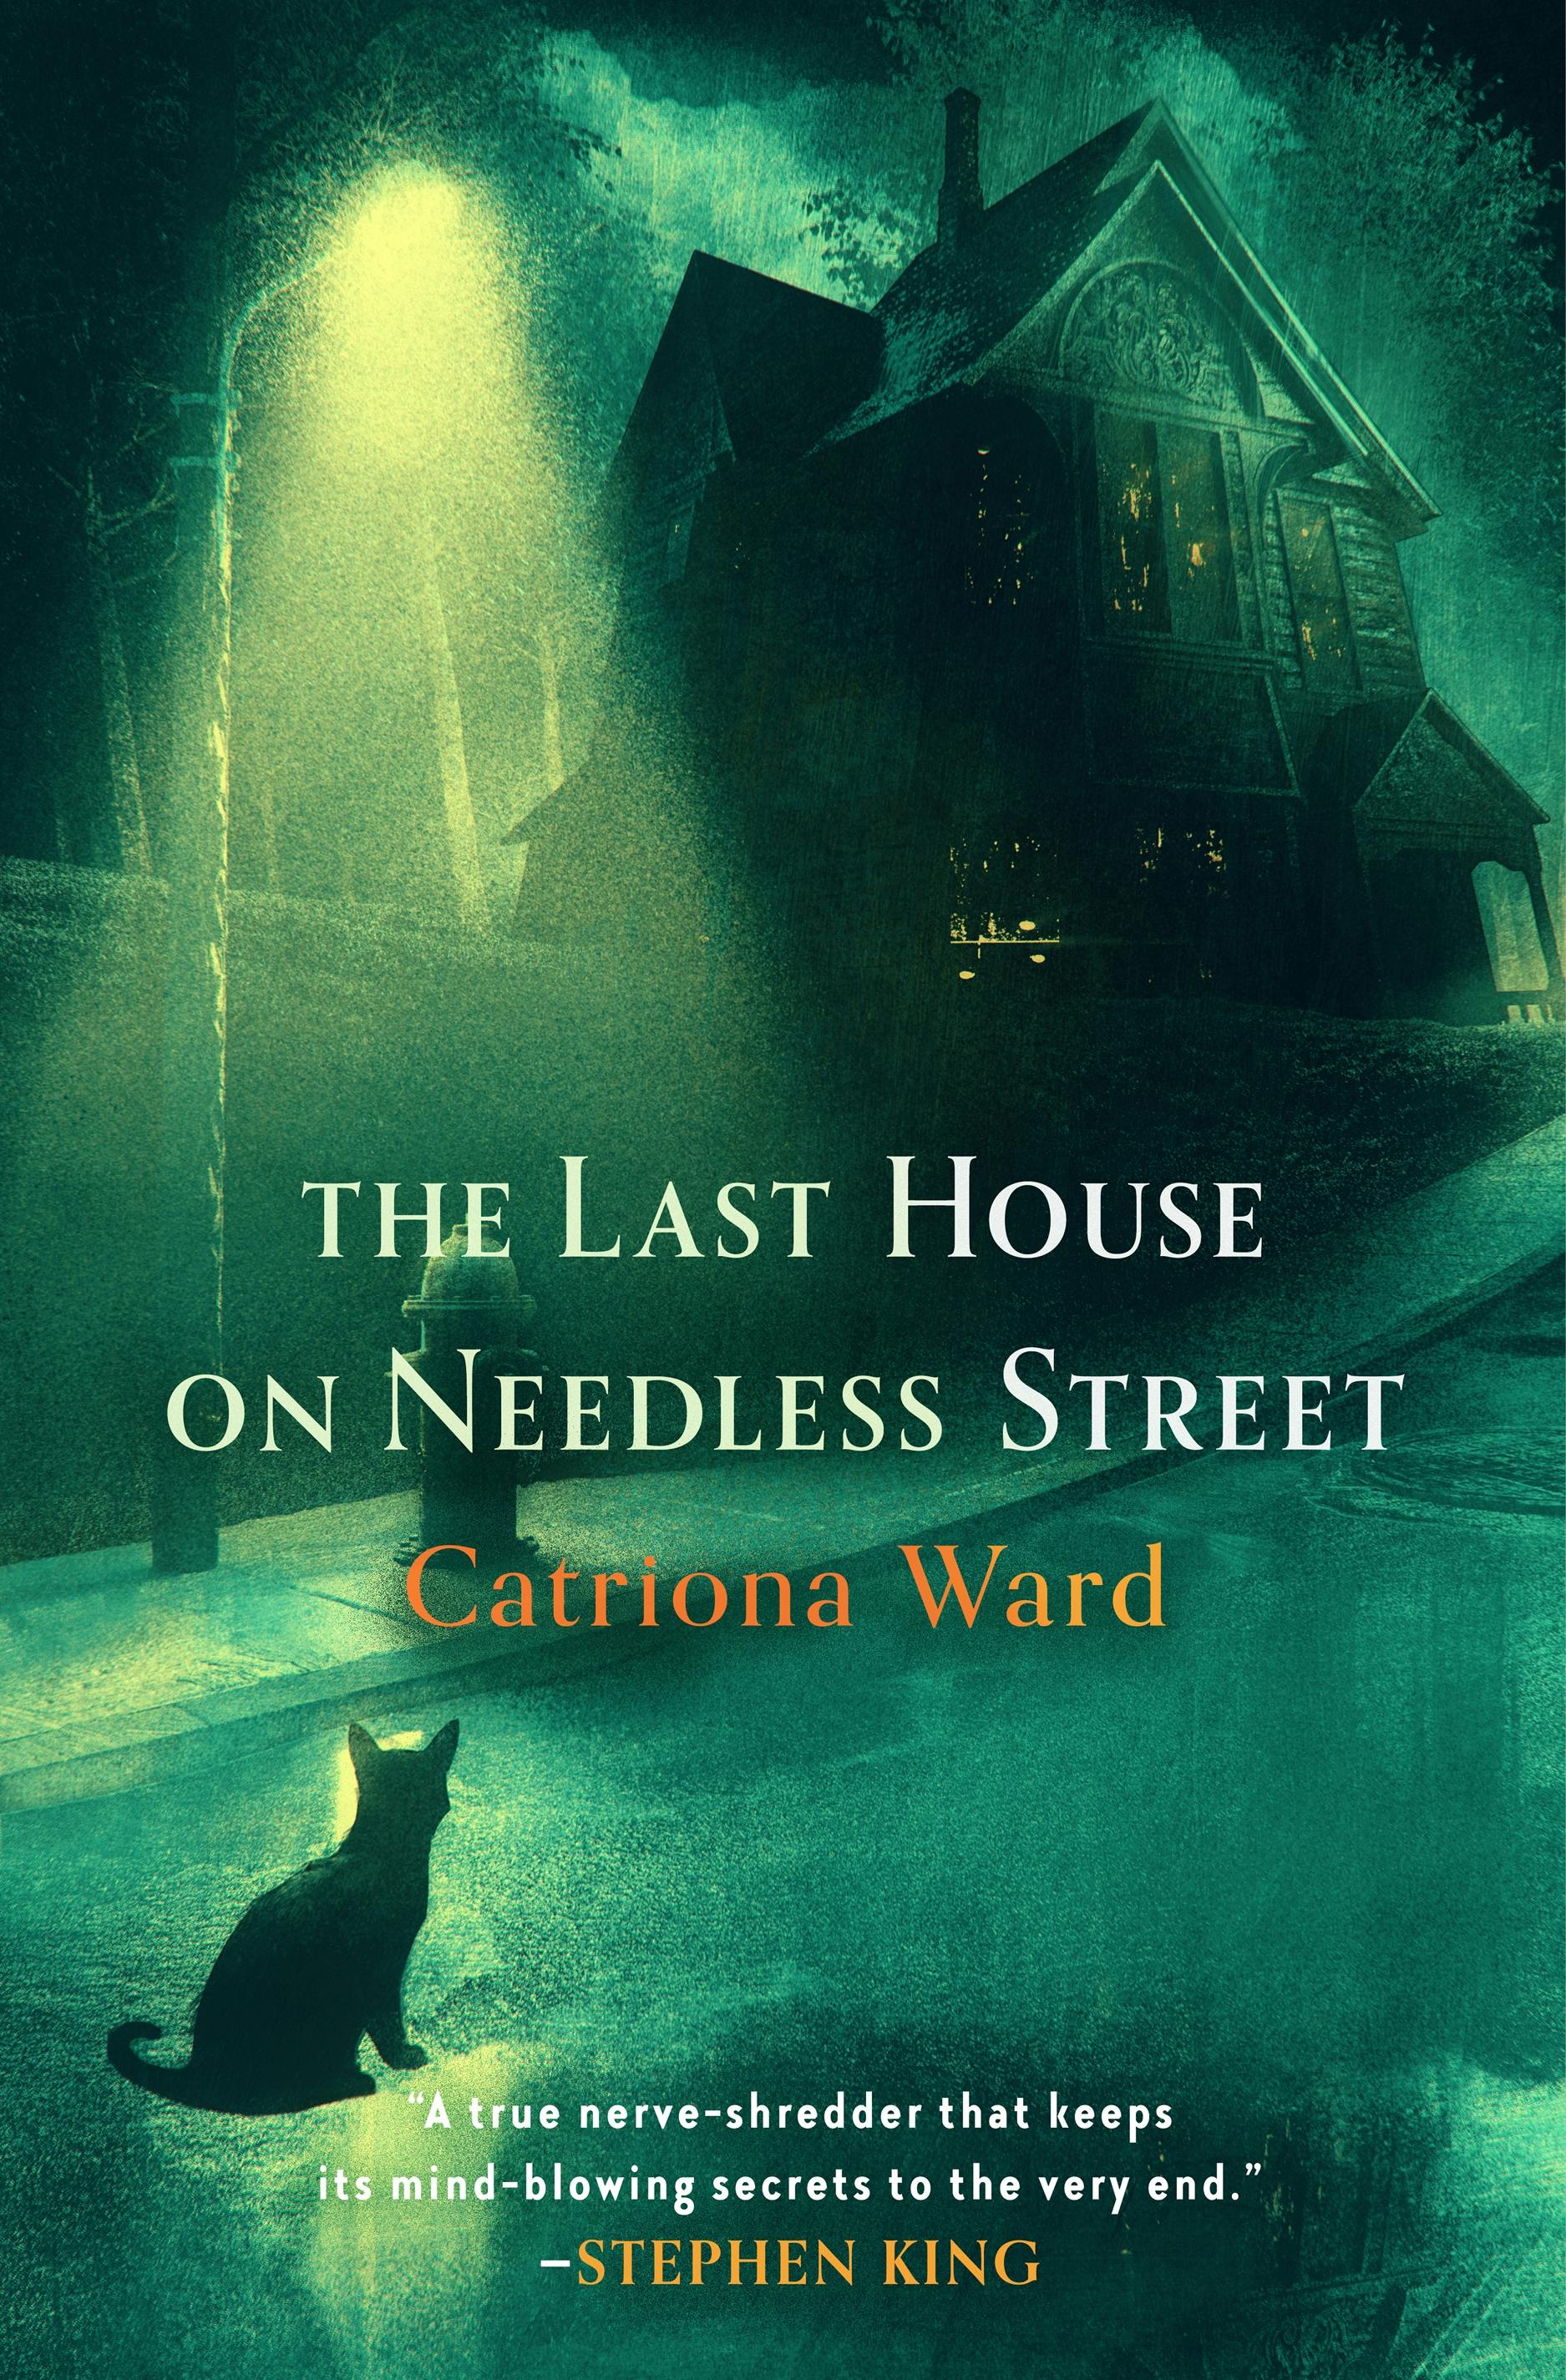 Cover for the book titled as: The Last House on Needless Street